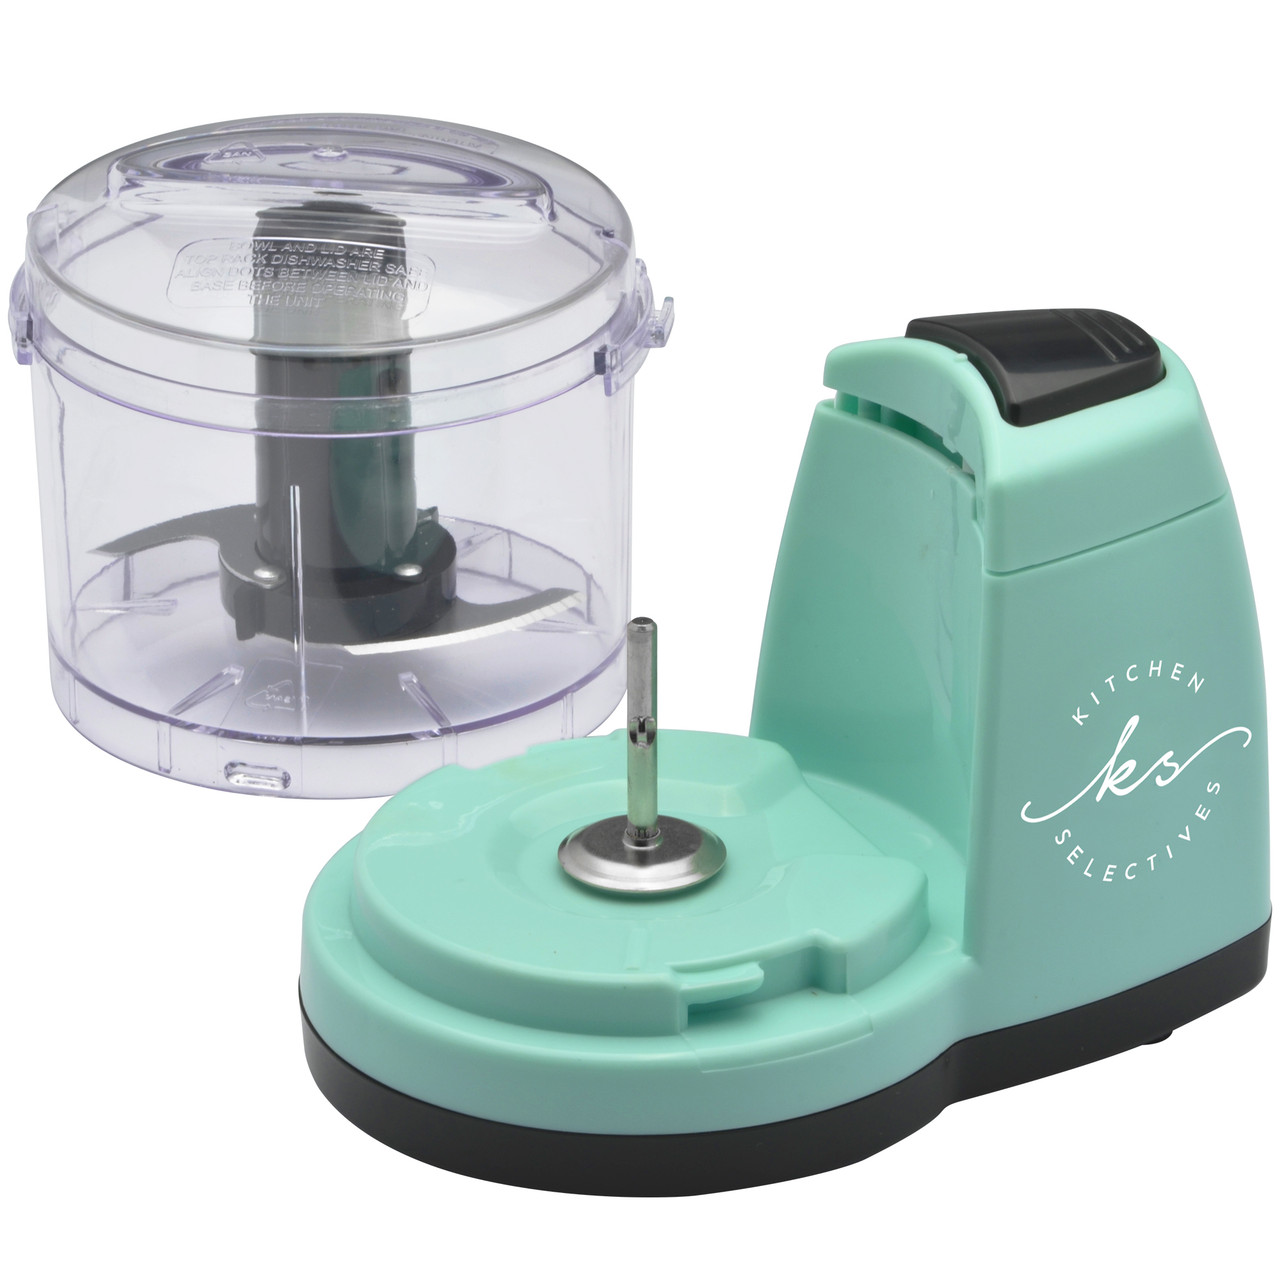 Hq Mighty Prep Chopper And Whipper With Extra Bowl And Lid Model 673-137  Manufacturer Refurbished Teal : Target